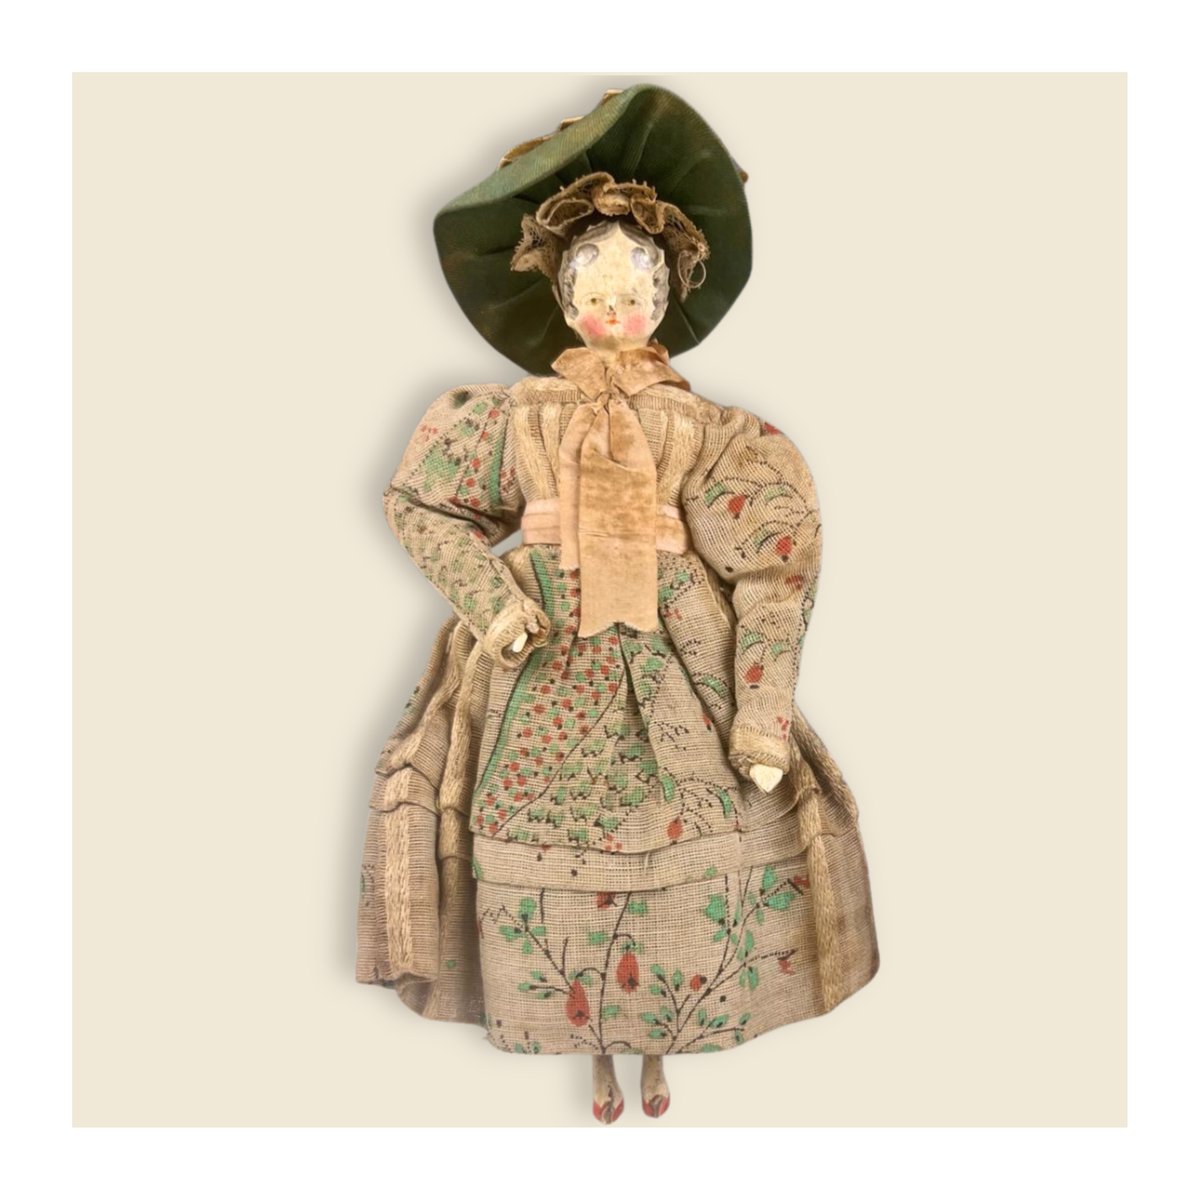 The results of our March Fine Art & Antique Auction are in! A top result of the day came in the form of this unusual pedlar doll, which sold for £2,800. Standing at just 17cm tall, we particularly loved her miniature basket. Full results here: tinyurl.com/march-results